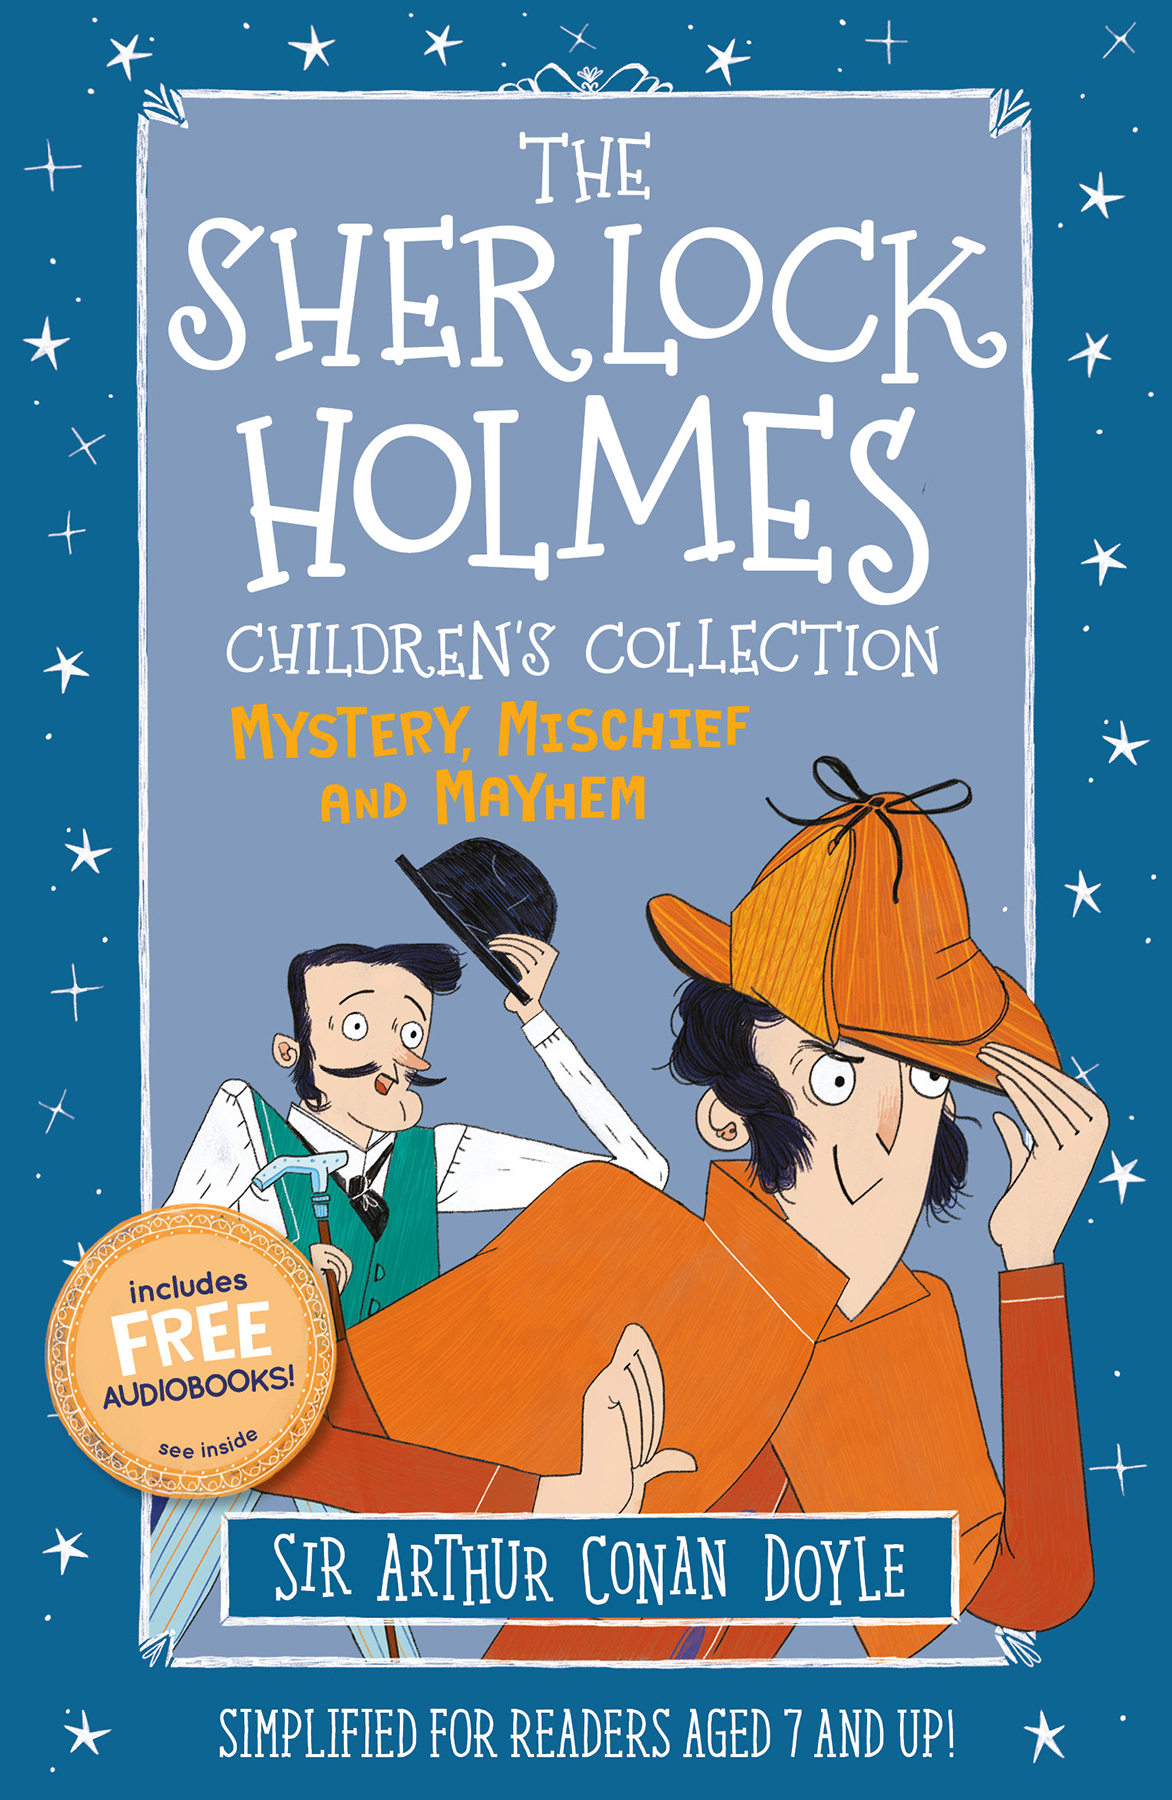 the adventures of sherlock holmes book length